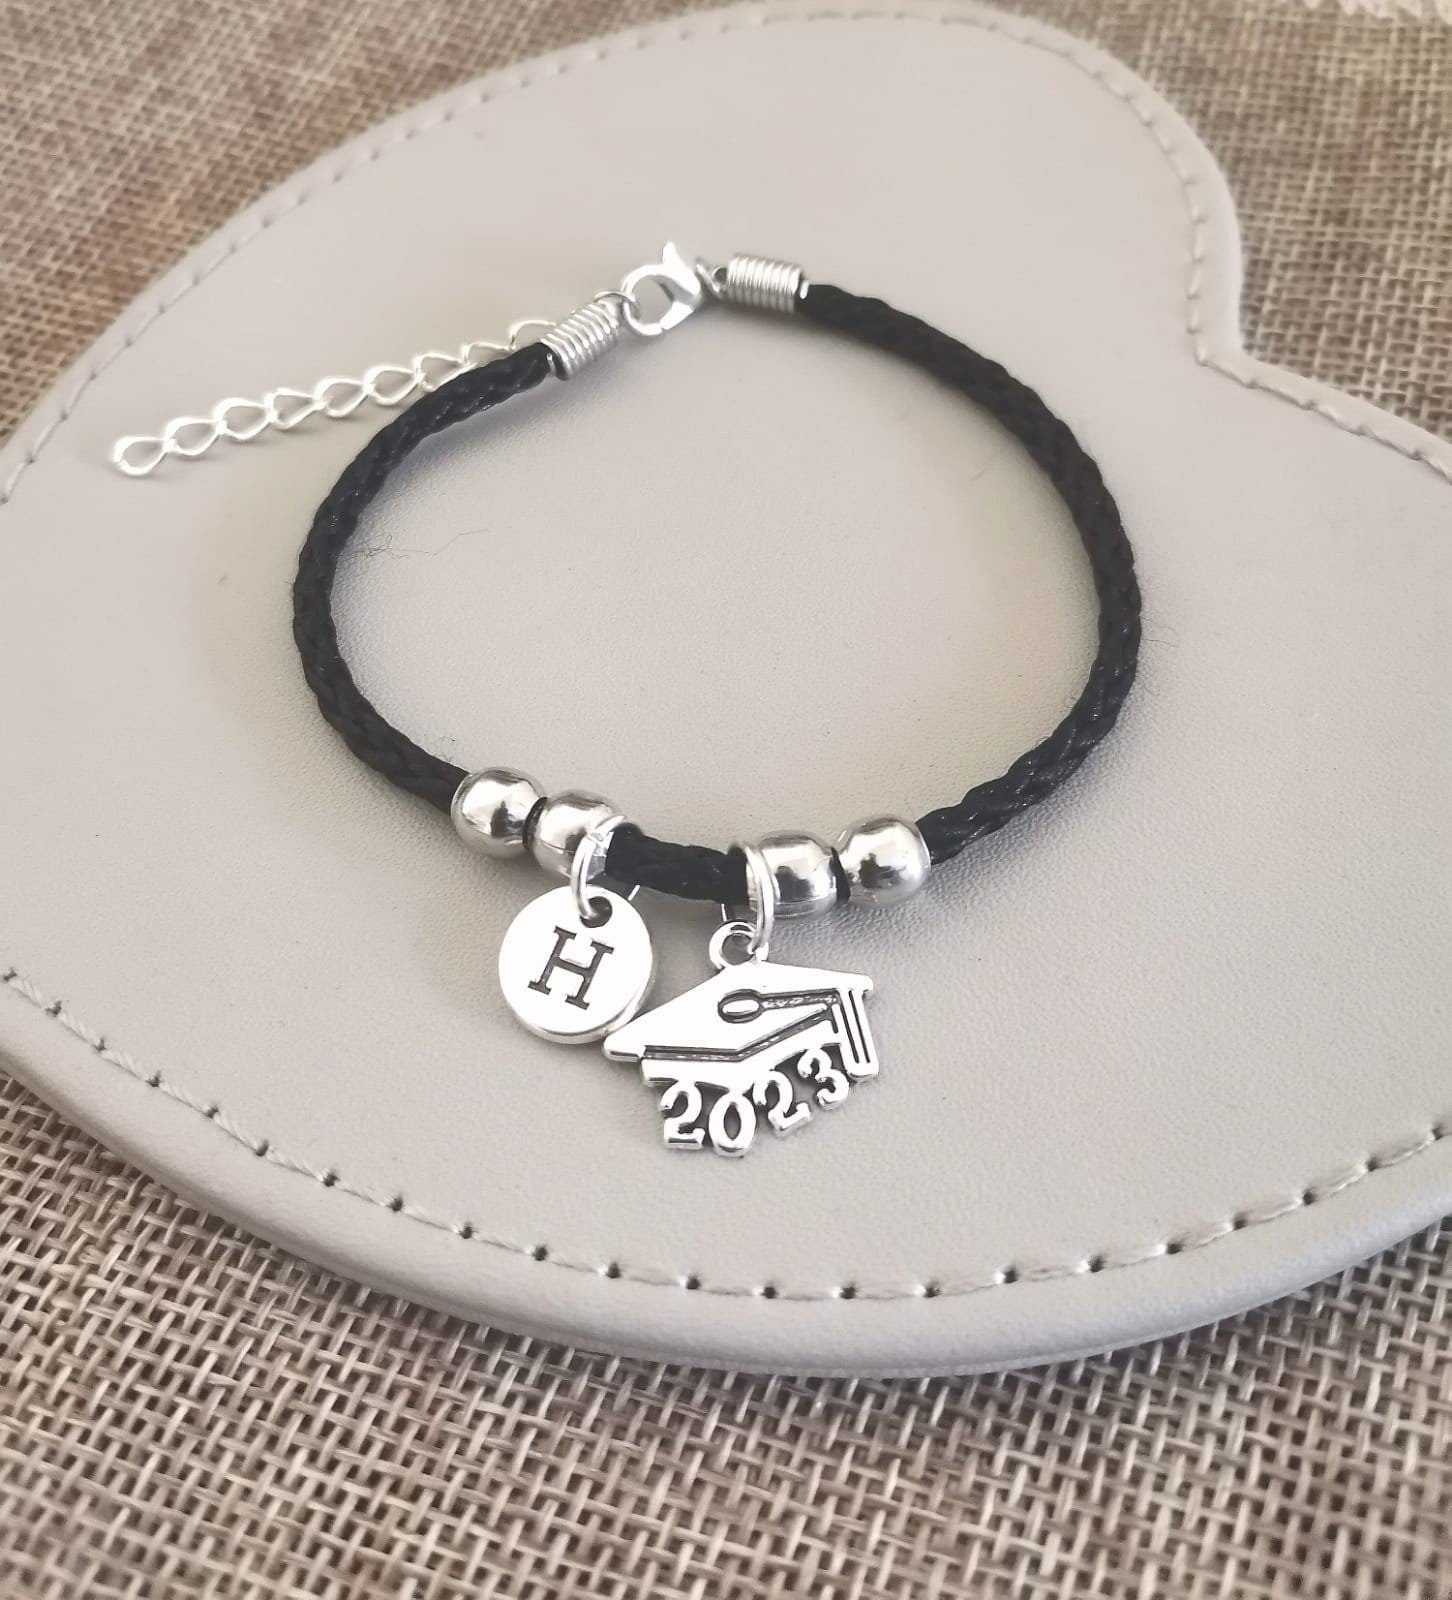 2023 Graduation Gift, Graduation bracelet 2023, Graduation Gift for her, Graduation Gift for him, Graduate, School. College, Class of  2023